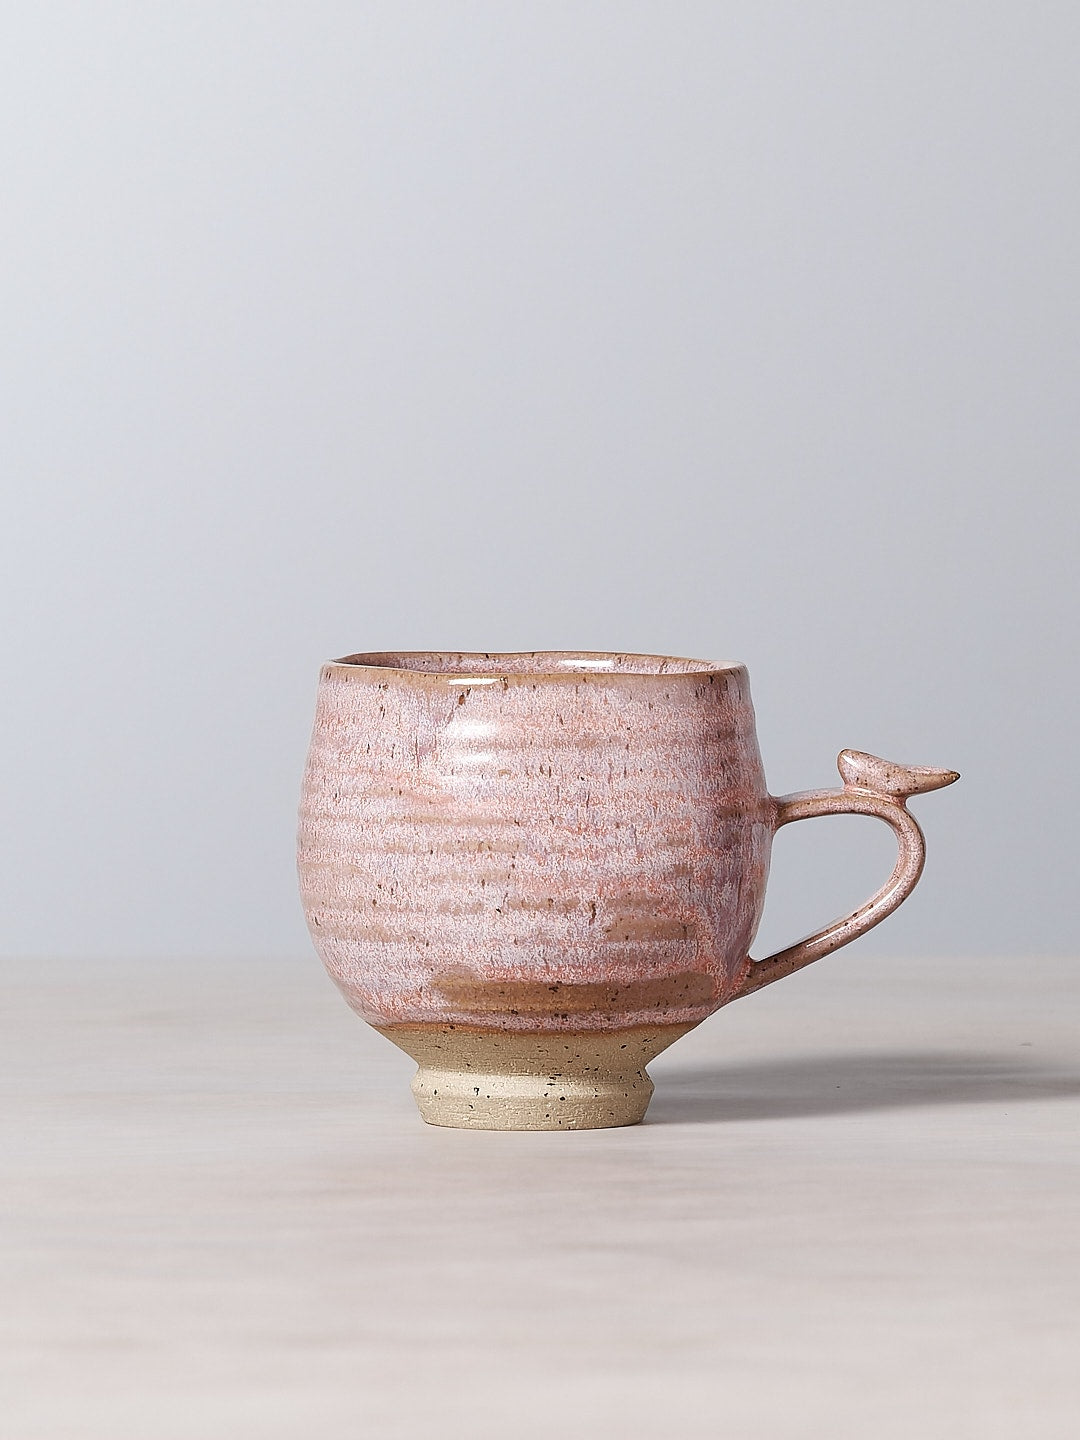 A small handmade Bird Handle Cup - Rhubarb, adorned with delicate blooms and birds, sitting on a table in New Zealand.